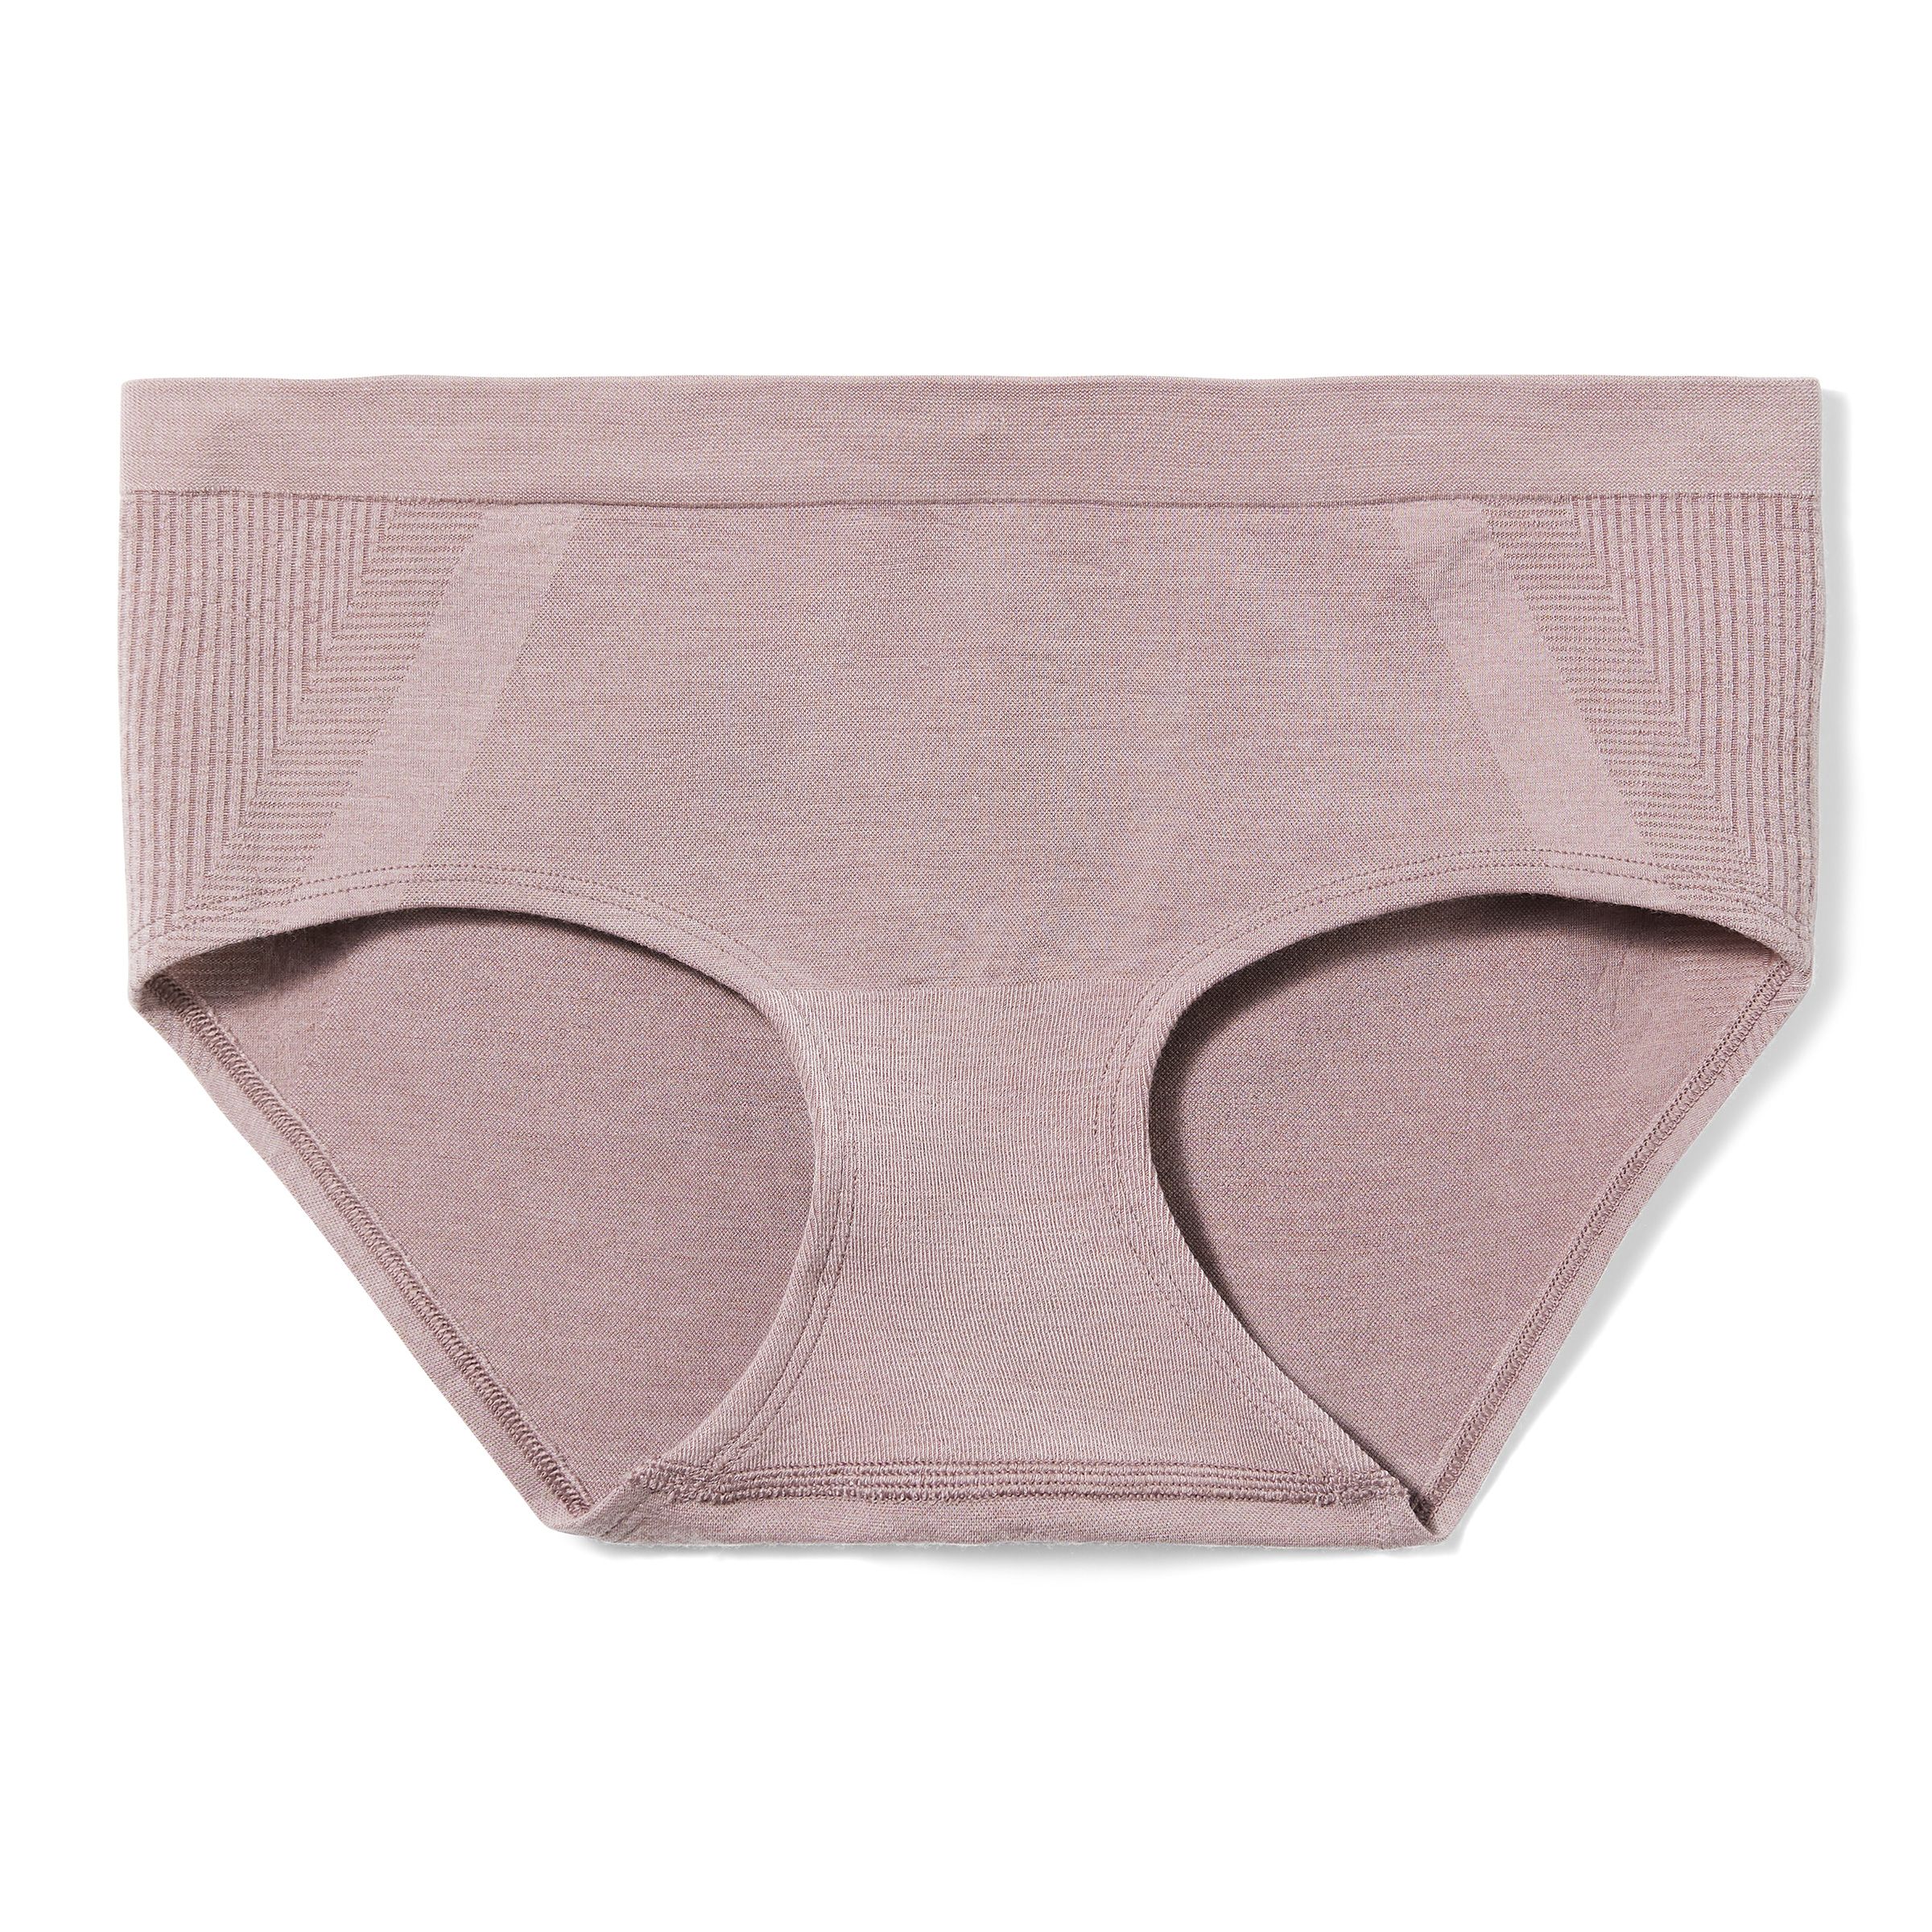 Buy online Grey Polyamide Hipster Panty from lingerie for Women by